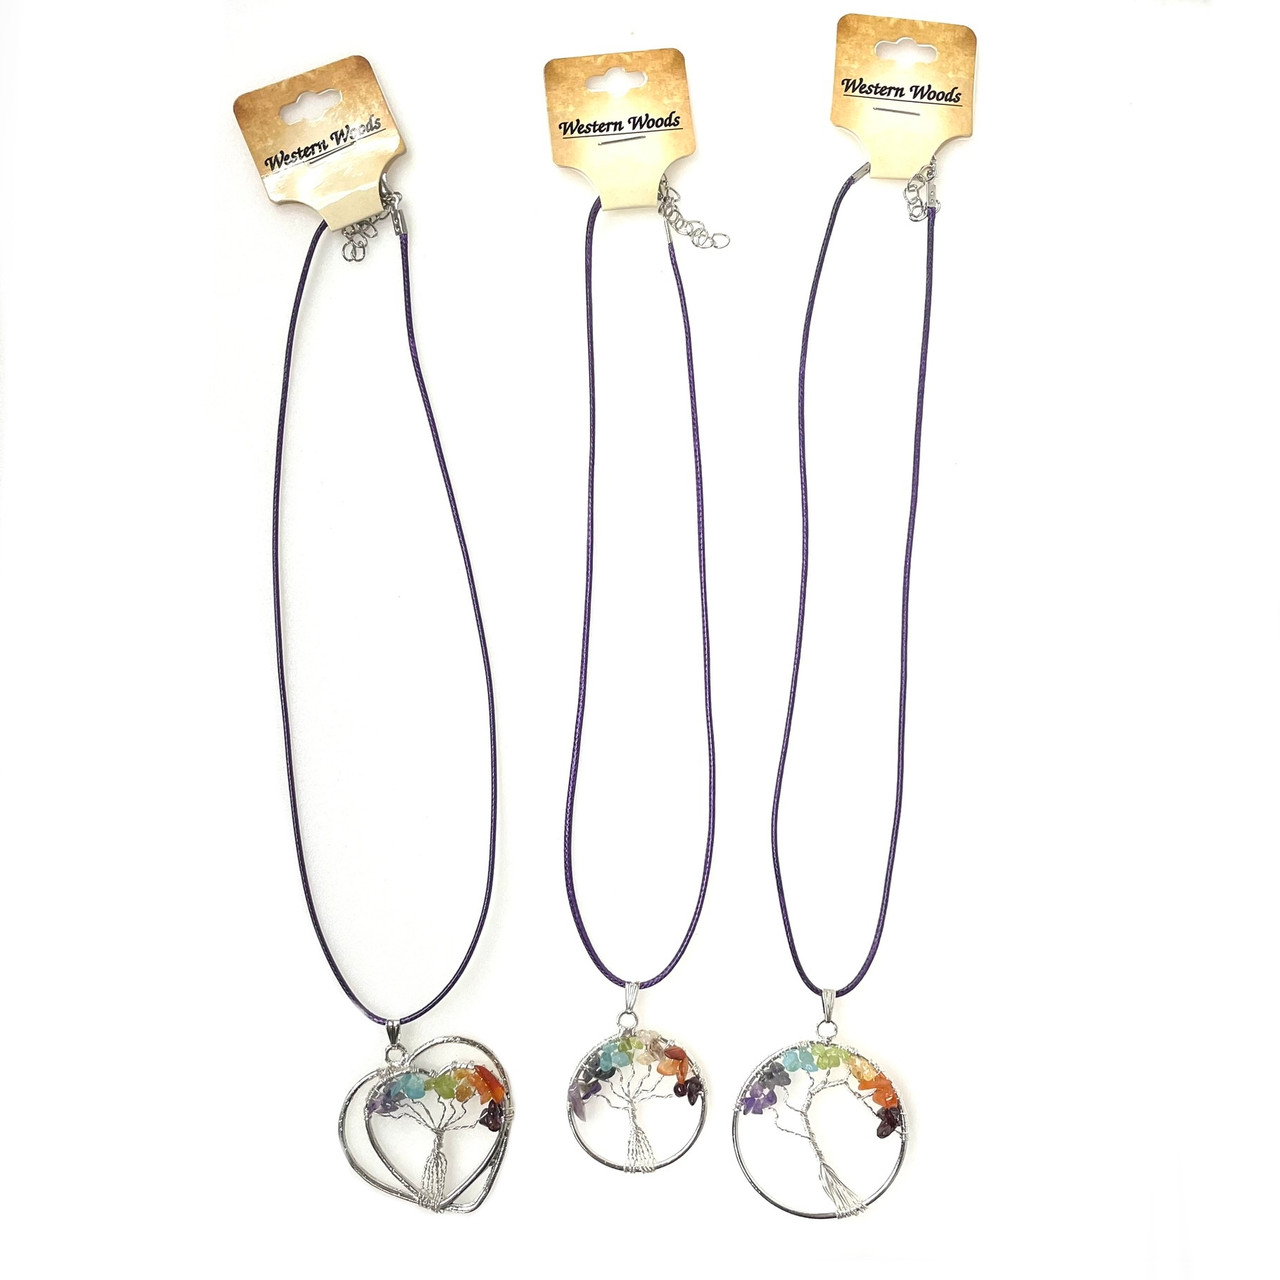 Tree Life Quartz Crystal Healing Crystal Necklace Set Chakra Gemstone  Pendant In Copper And Silver Wire Wrap From Hu0822, $14.24 | DHgate.Com